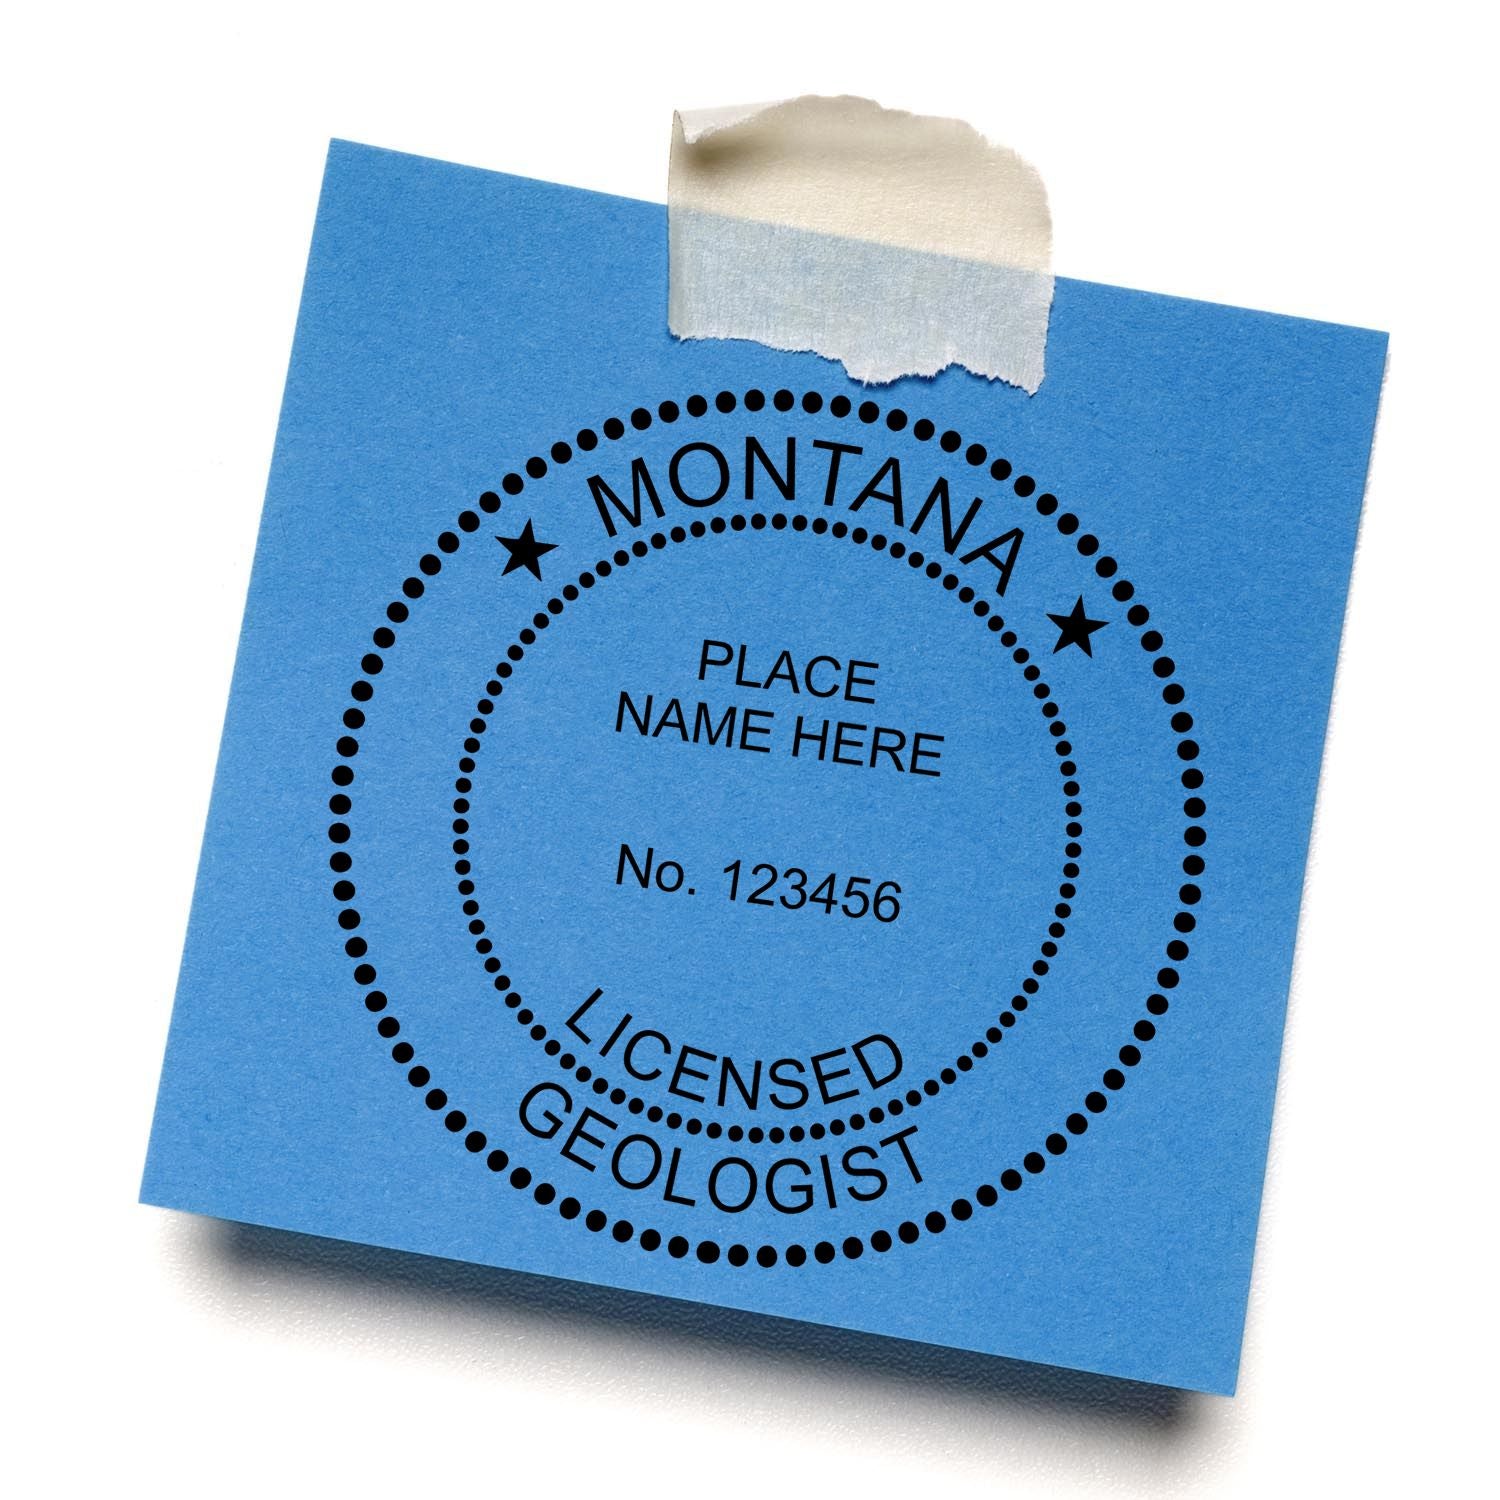 The main image for the Slim Pre-Inked Montana Professional Geologist Seal Stamp depicting a sample of the imprint and imprint sample